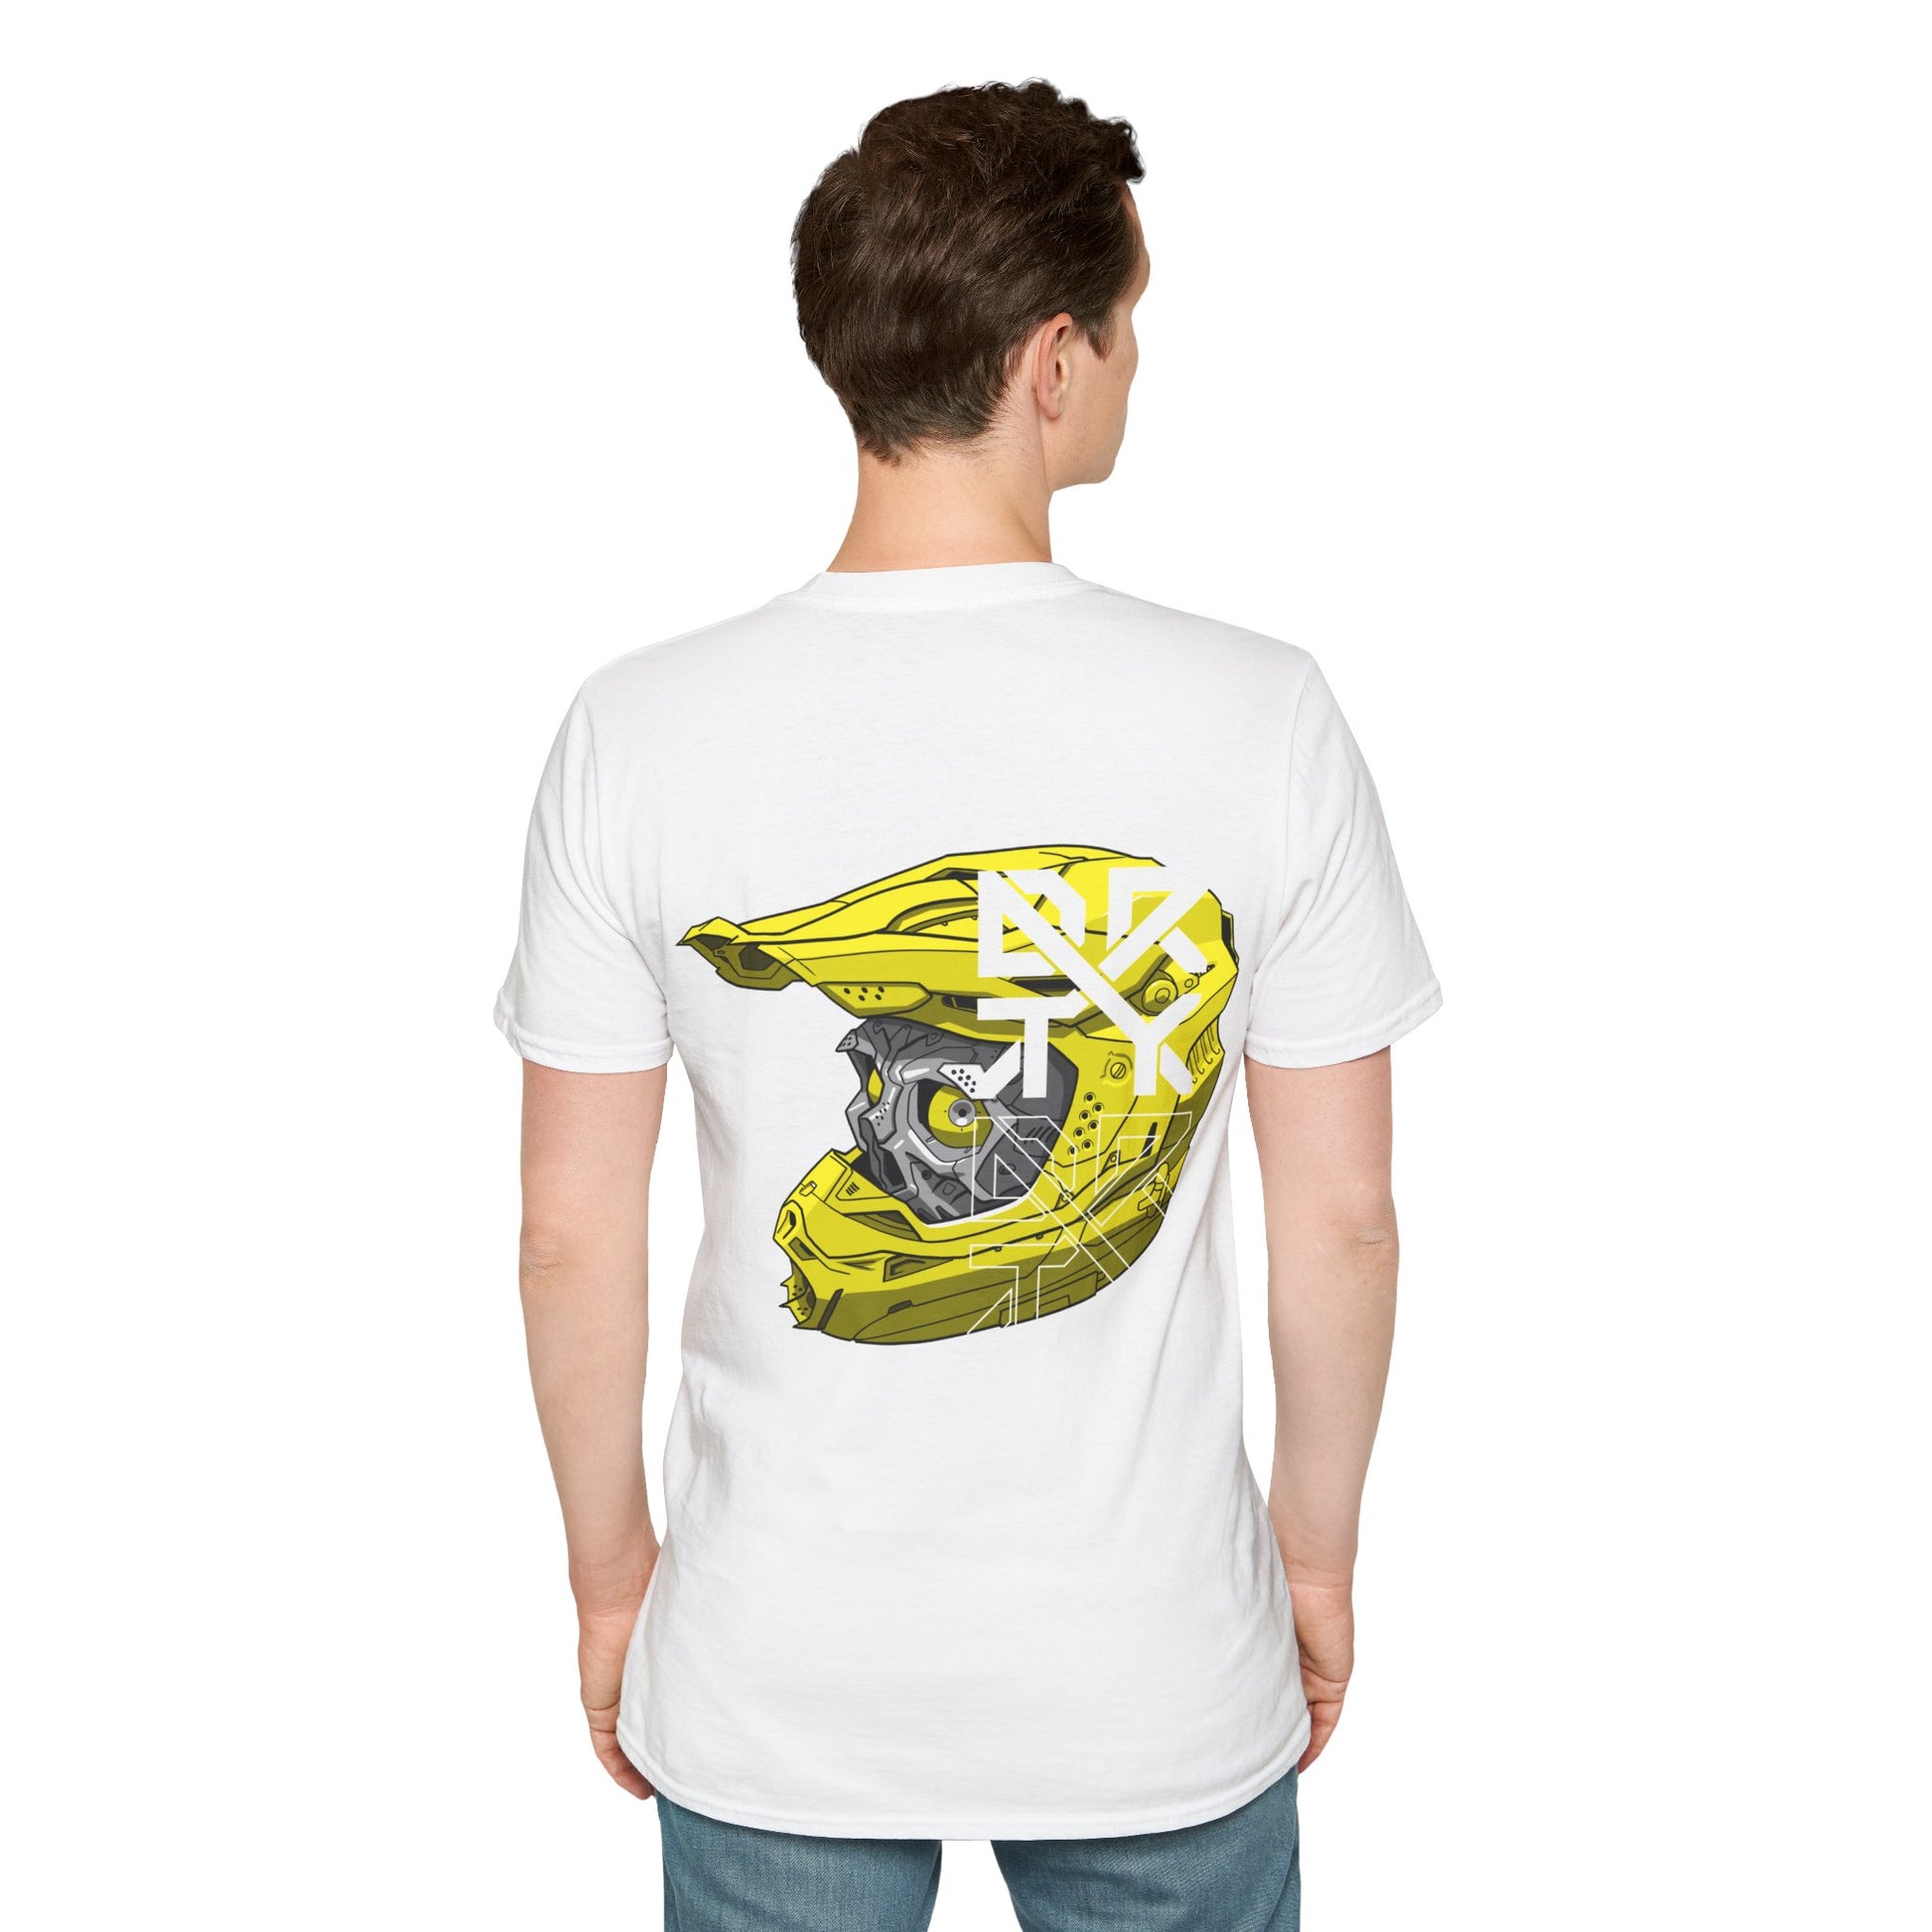 This image showcases a man with the back view of a T-shirt with a cyber skull inside of a motocross helmet with a DRTY X logo on the helmet.